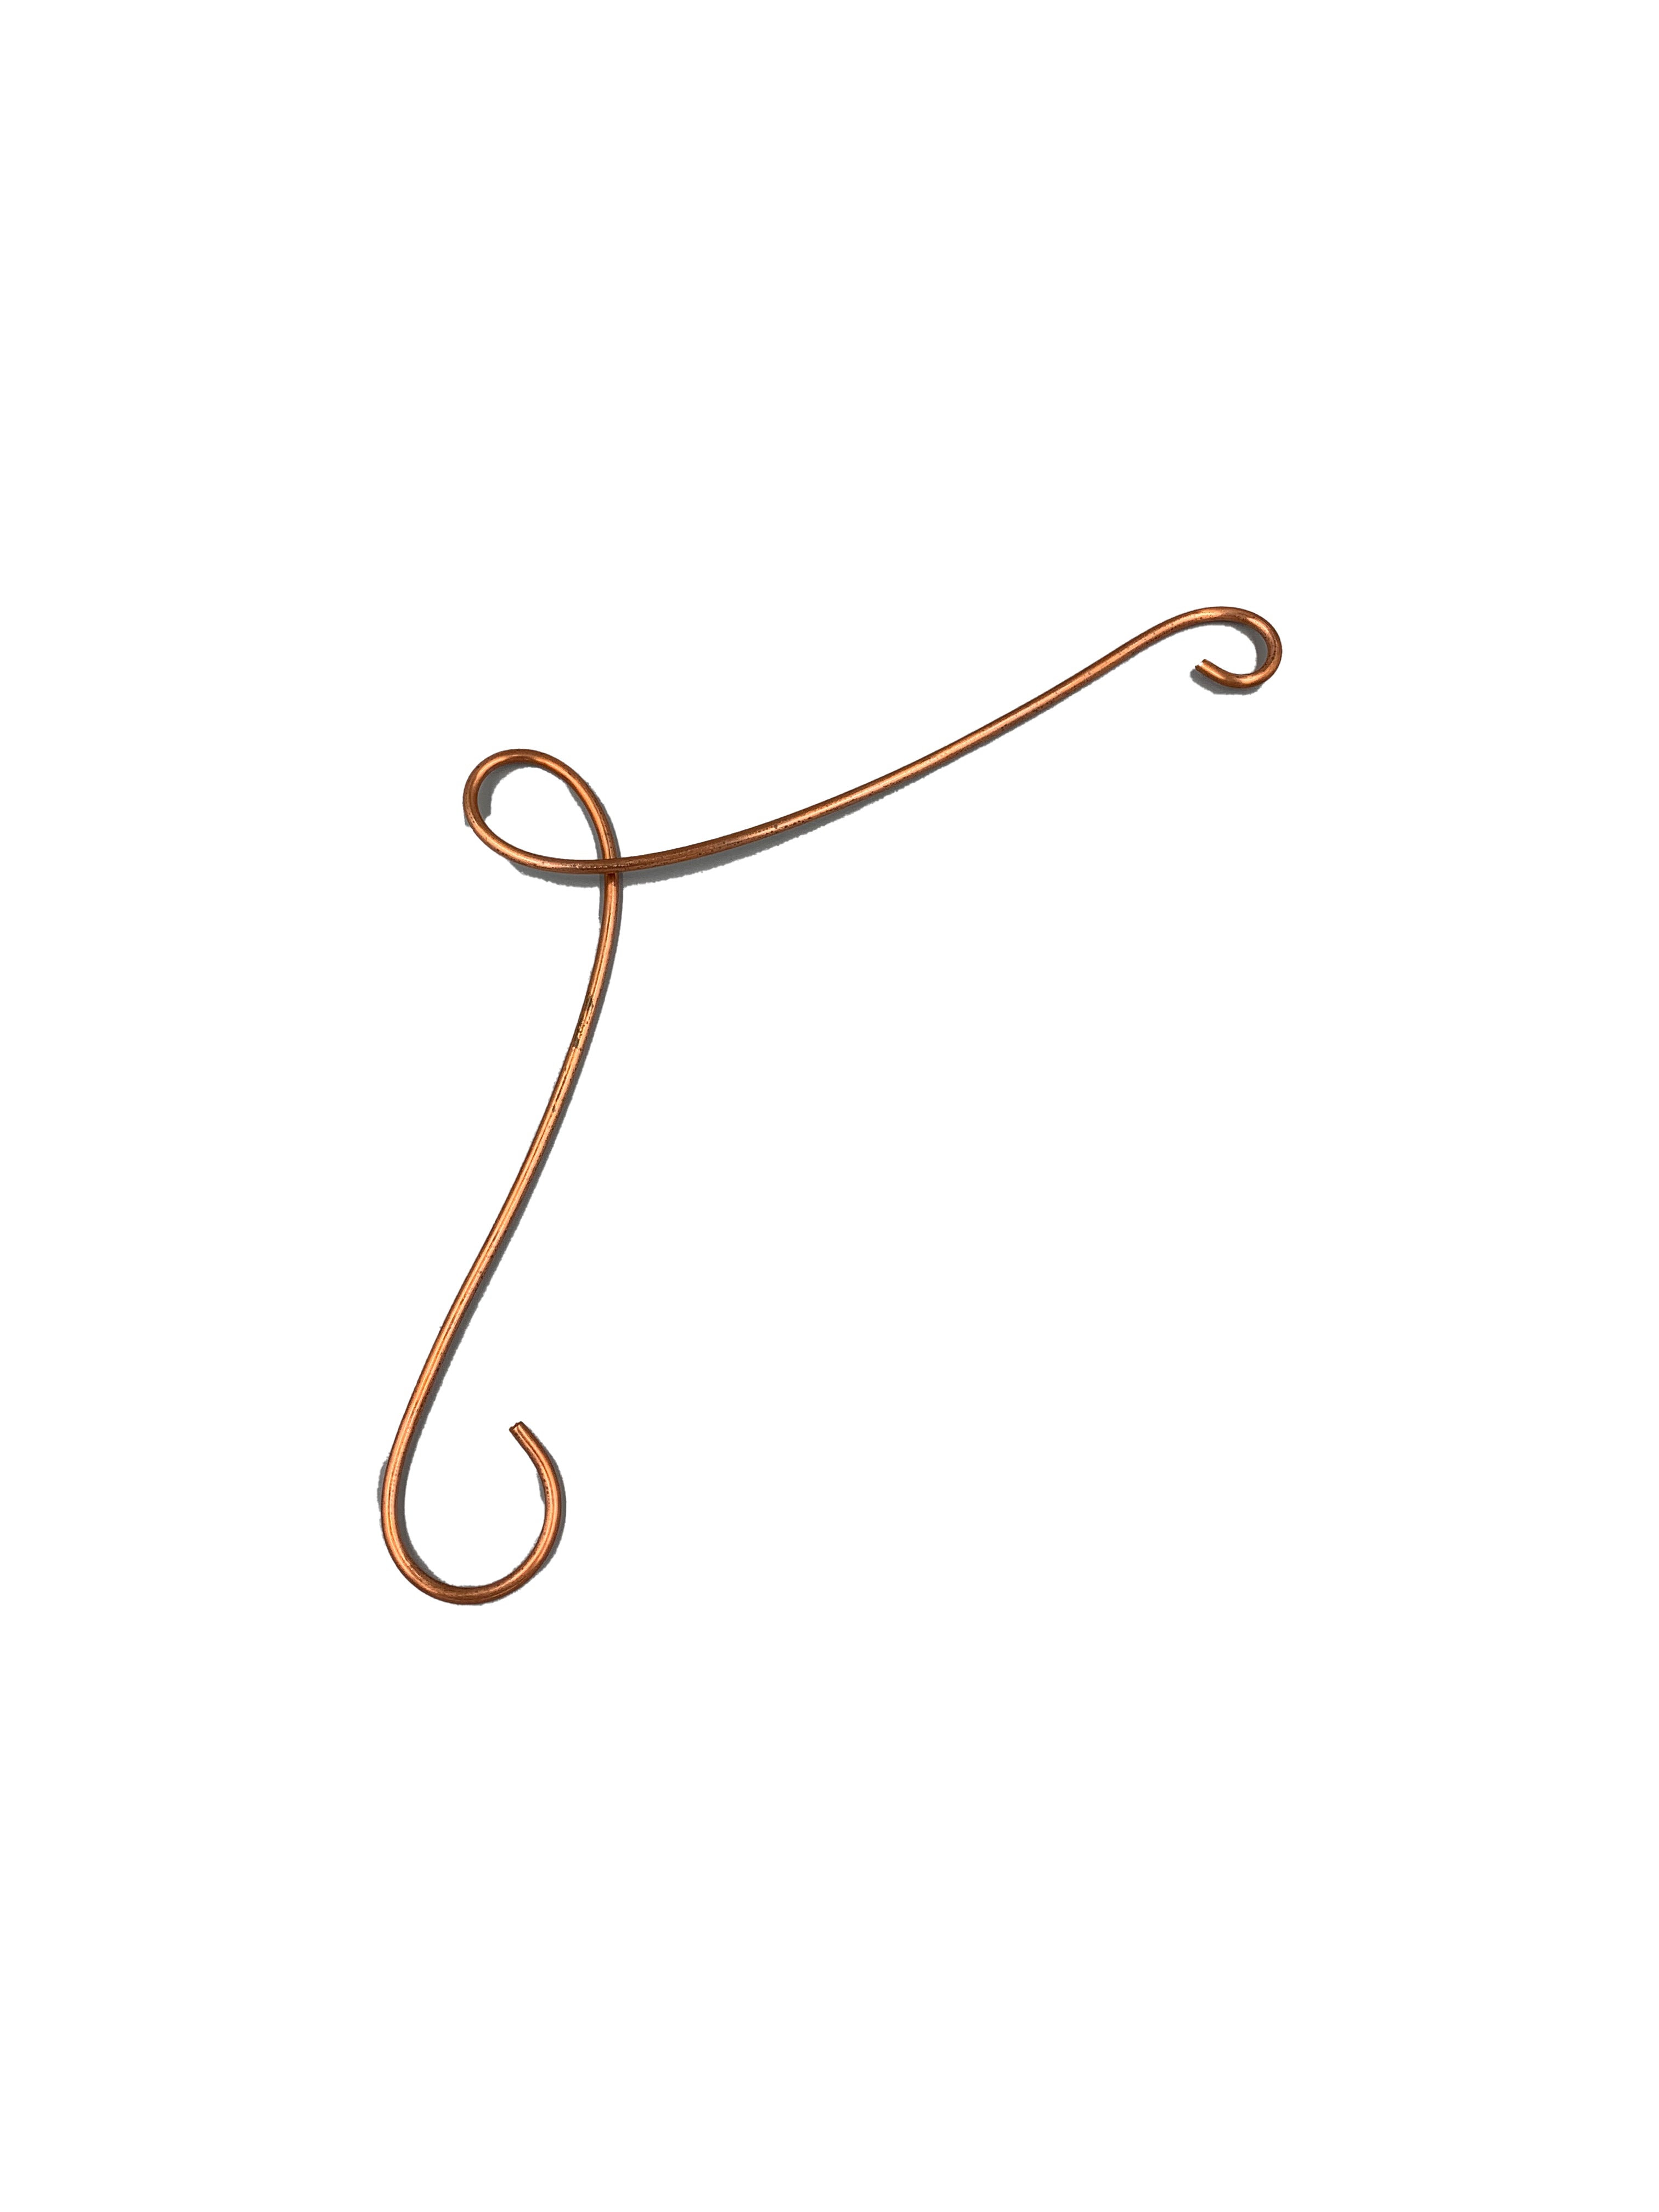 Copper Single Hanger Looped Style 8"